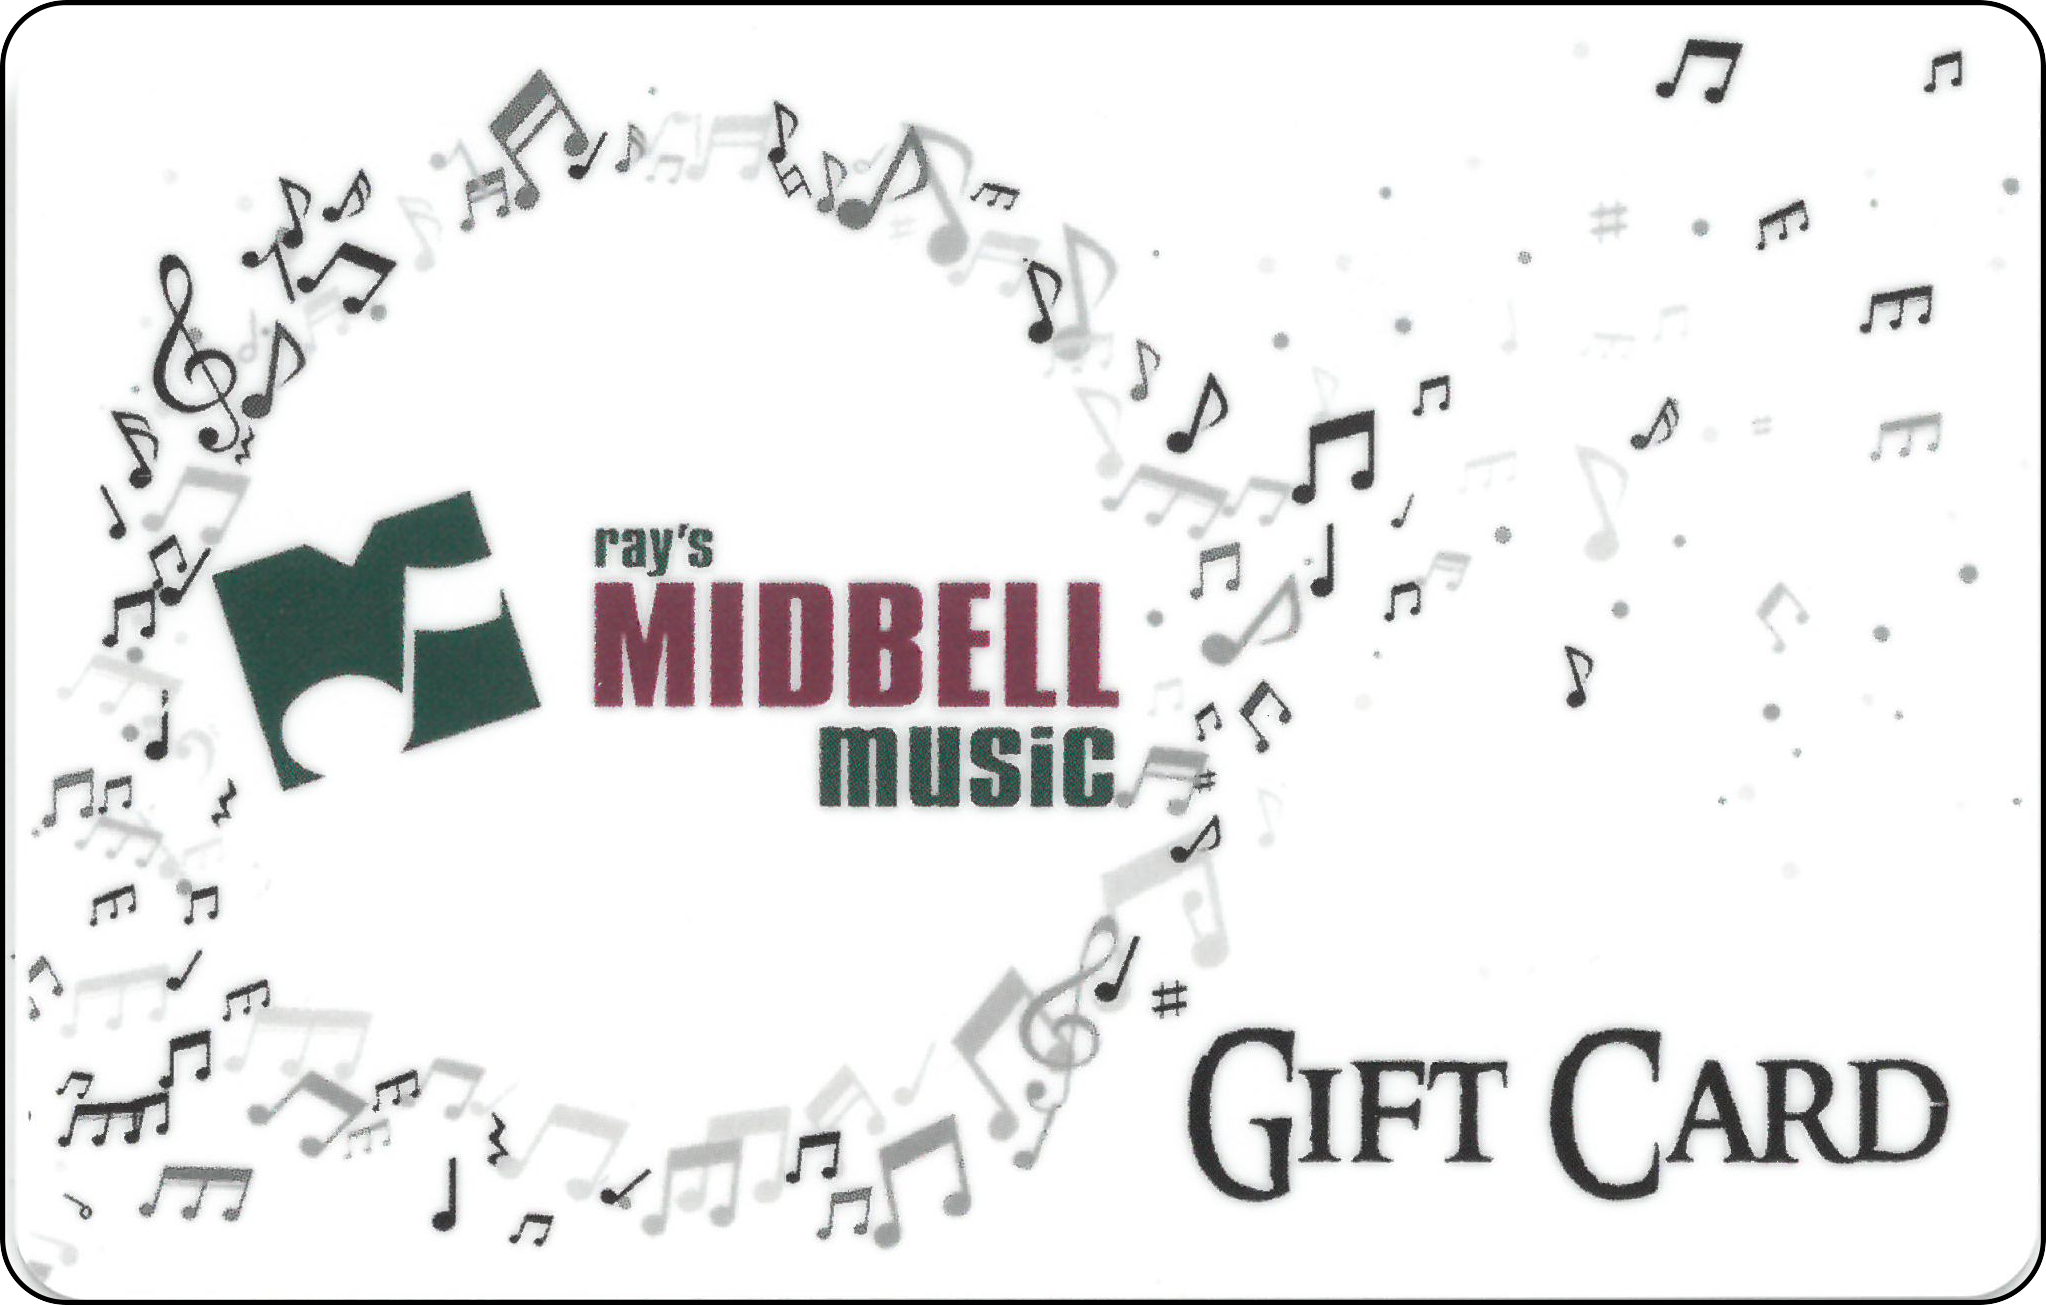 Midbell Music $75.00 Gift Card